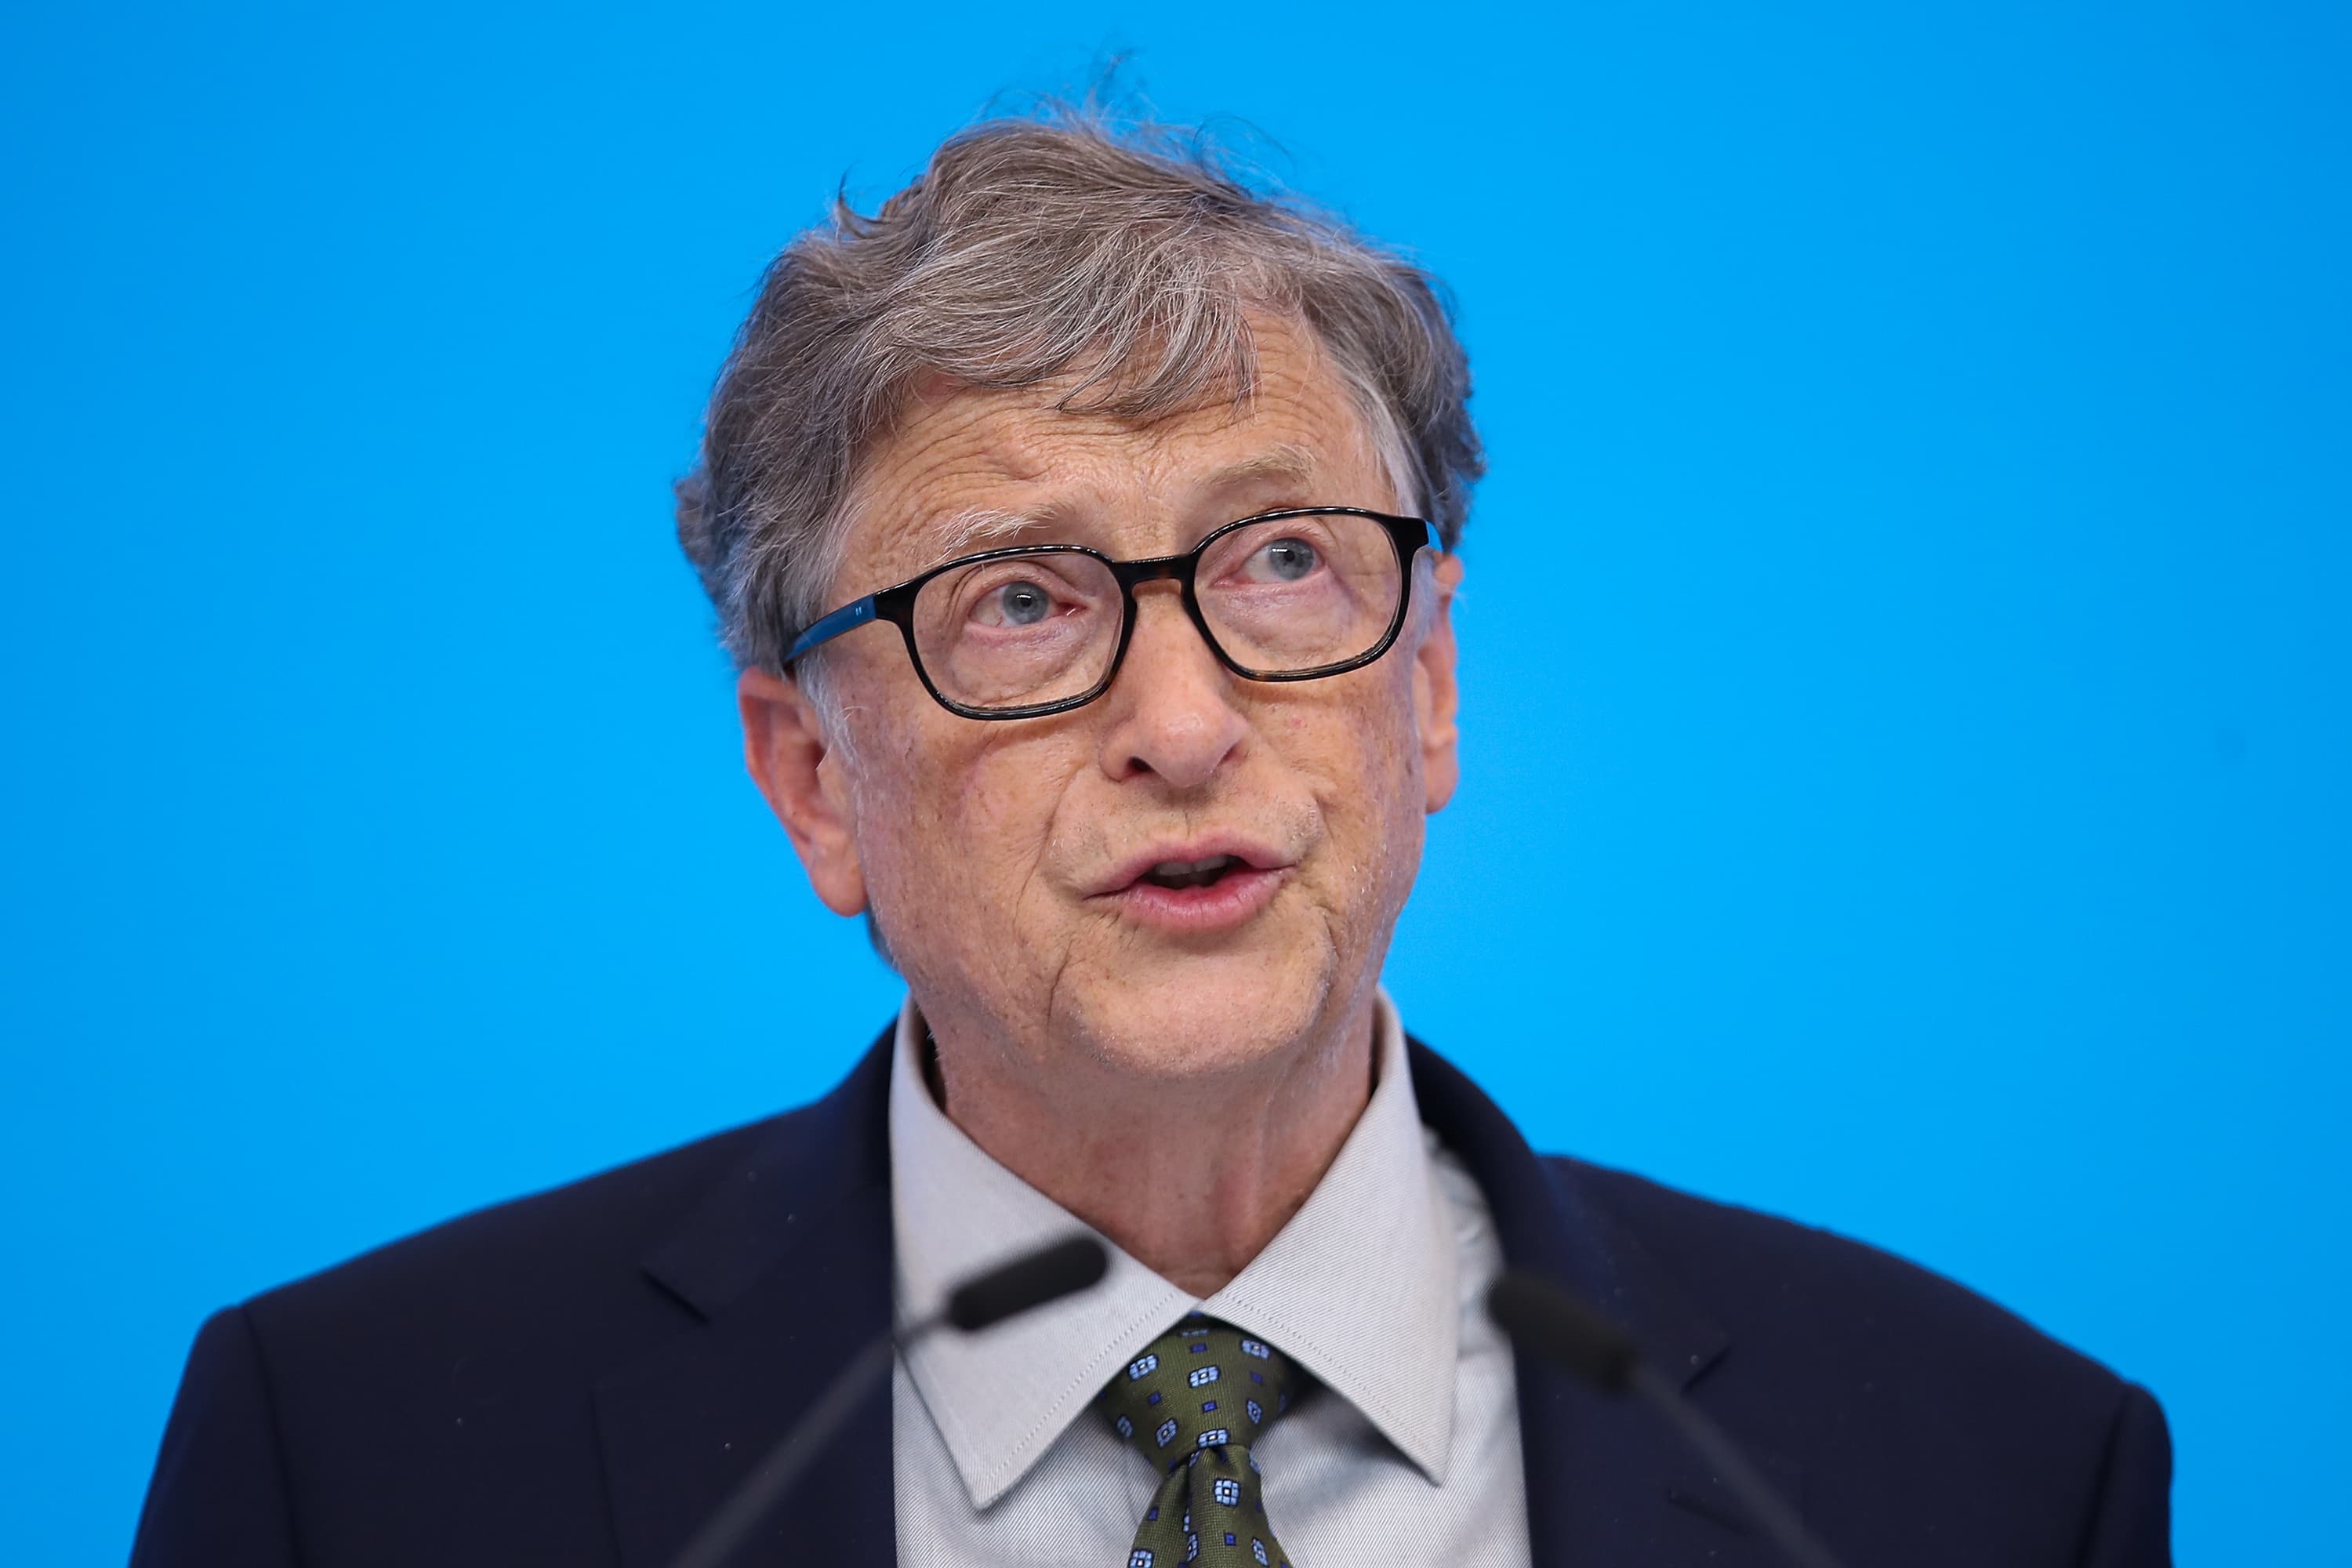 Bill Gates: Once Covid’s omicron variant passes, Covid will be more like the sea..